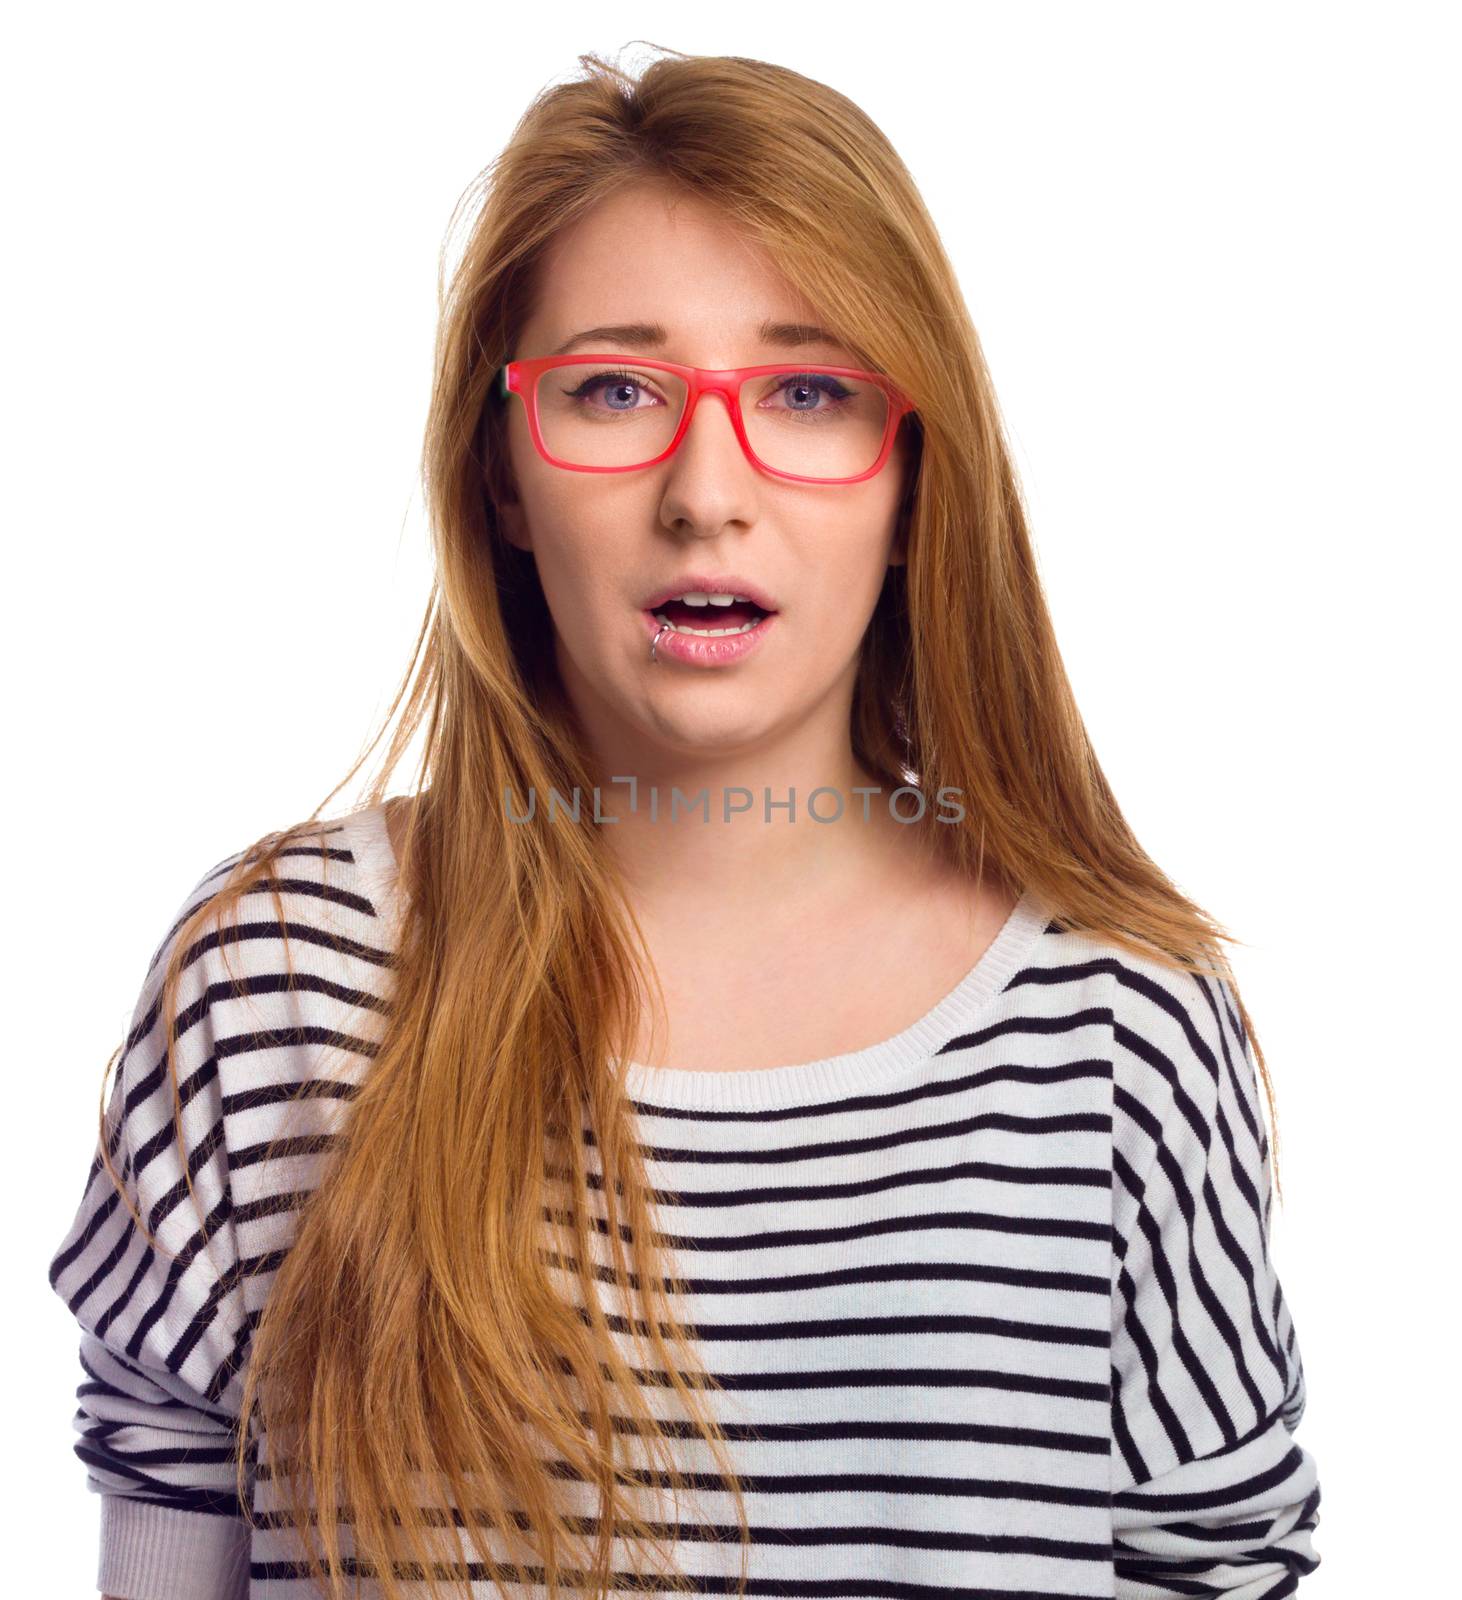 Funny portrait of excited woman wearing glasses eye wear. Young woman making funny face expression isolated on white background